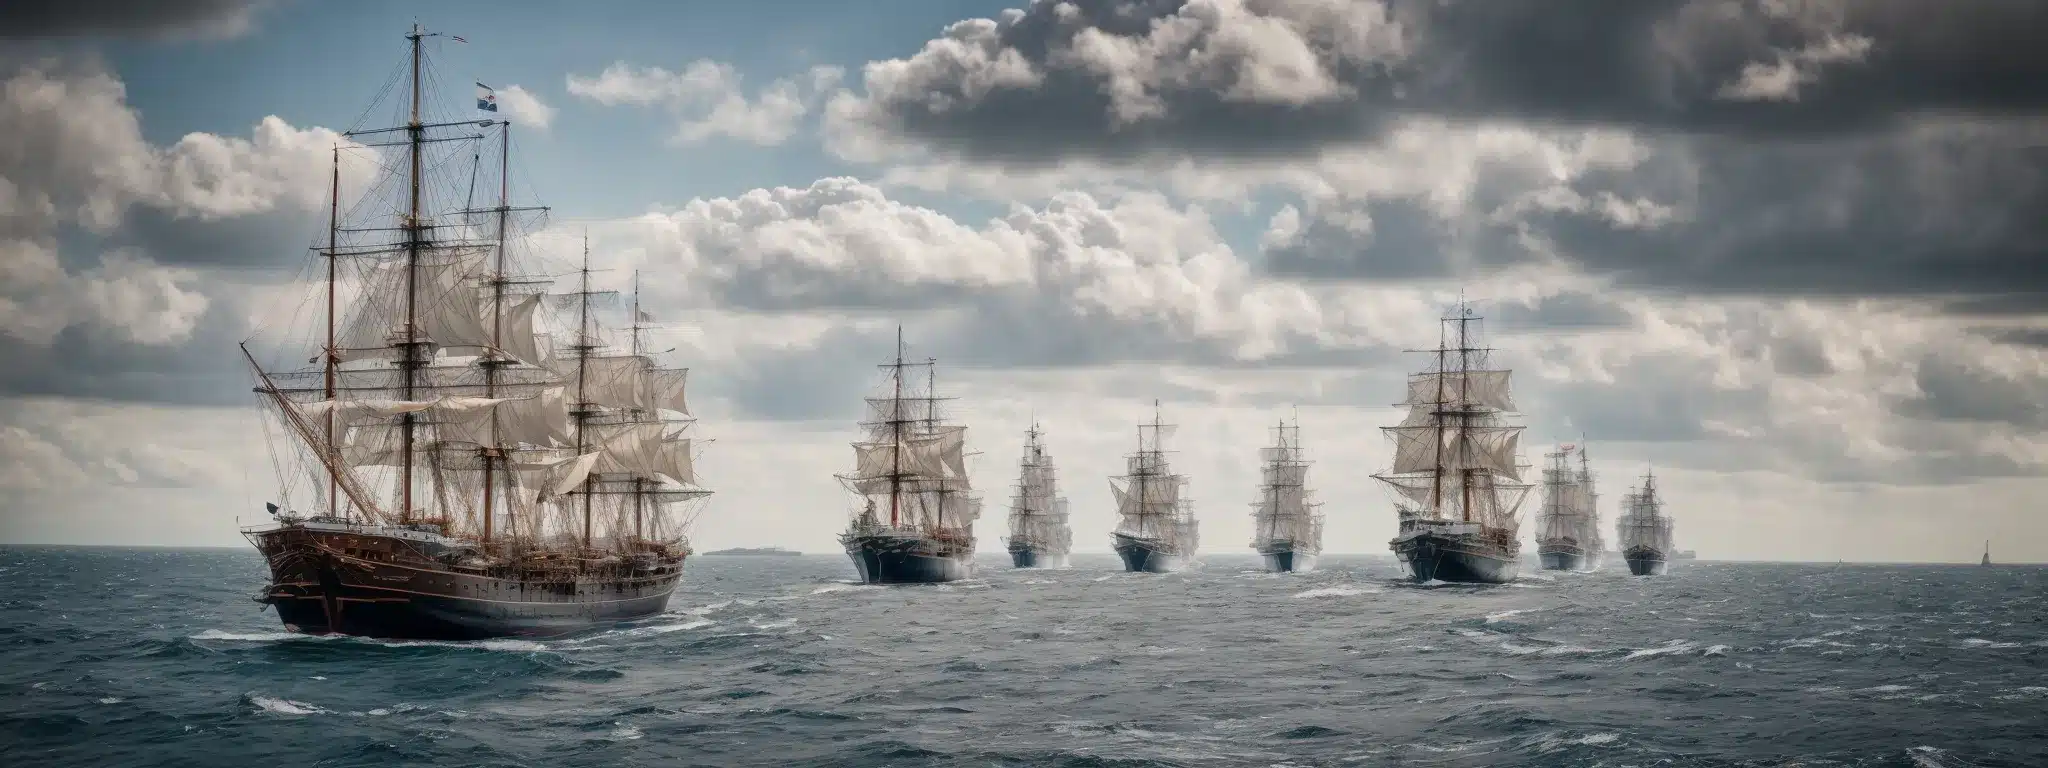 A Fleet Of Majestic Sailing Ships Preparing To Embark On An Open Sea Voyage Under A Vast Sky, Symbolizing The Strategic Journey Of B2B Marketing.